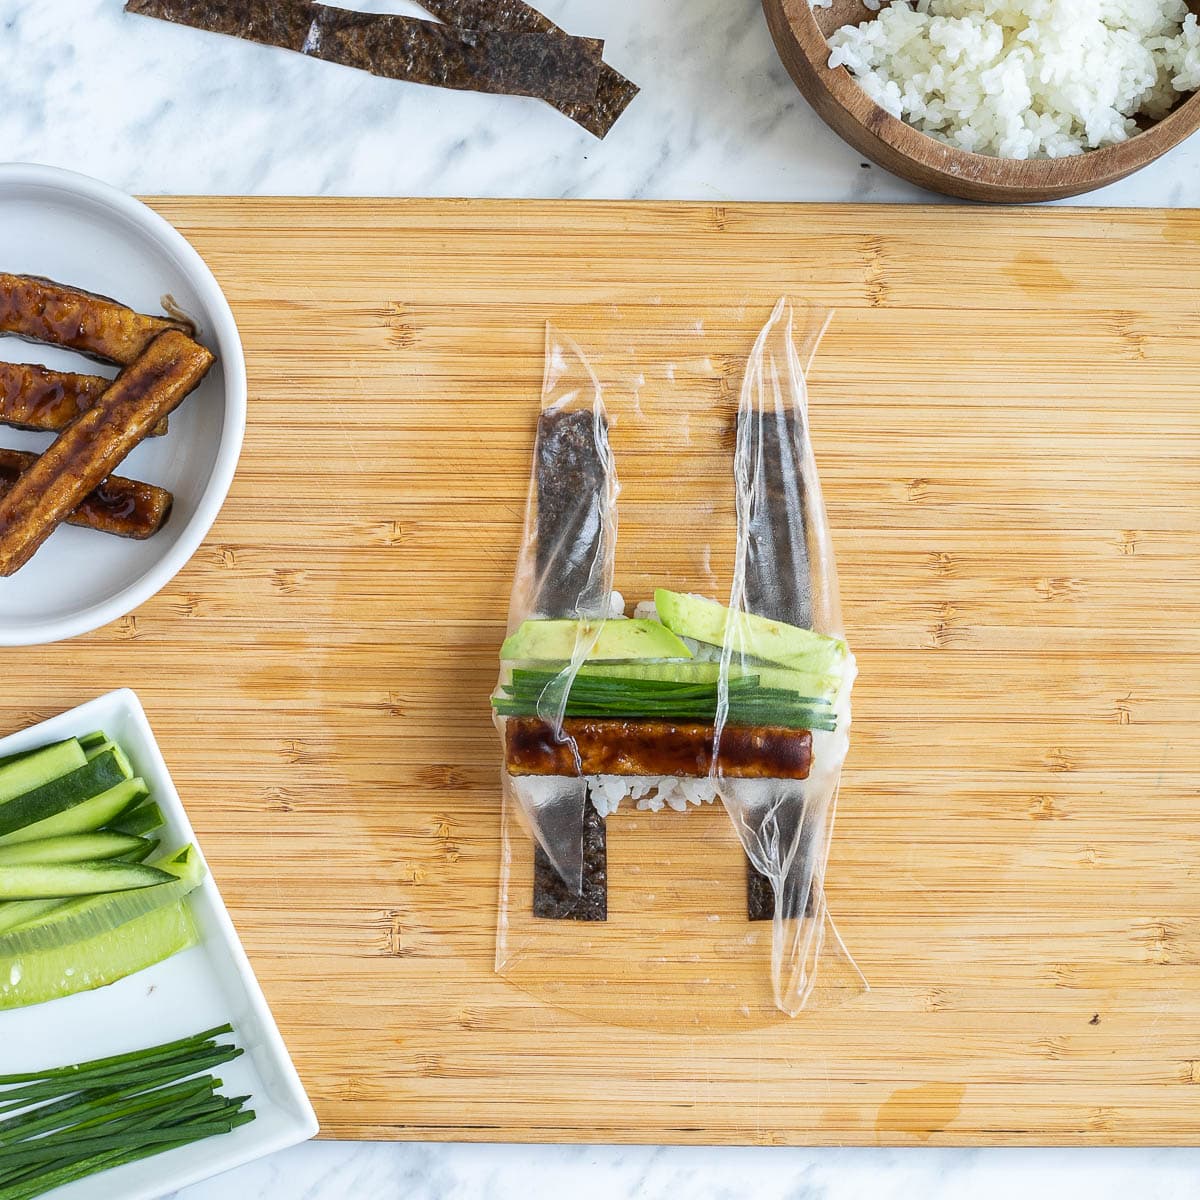 A wooden cutting board with wet rice paper folded in the middle from the sides with two nori strips, rice, cucumber sticks, avocado slices, chives, and brown tofu sticks in the middle. The remaining fillings are in small bowls.